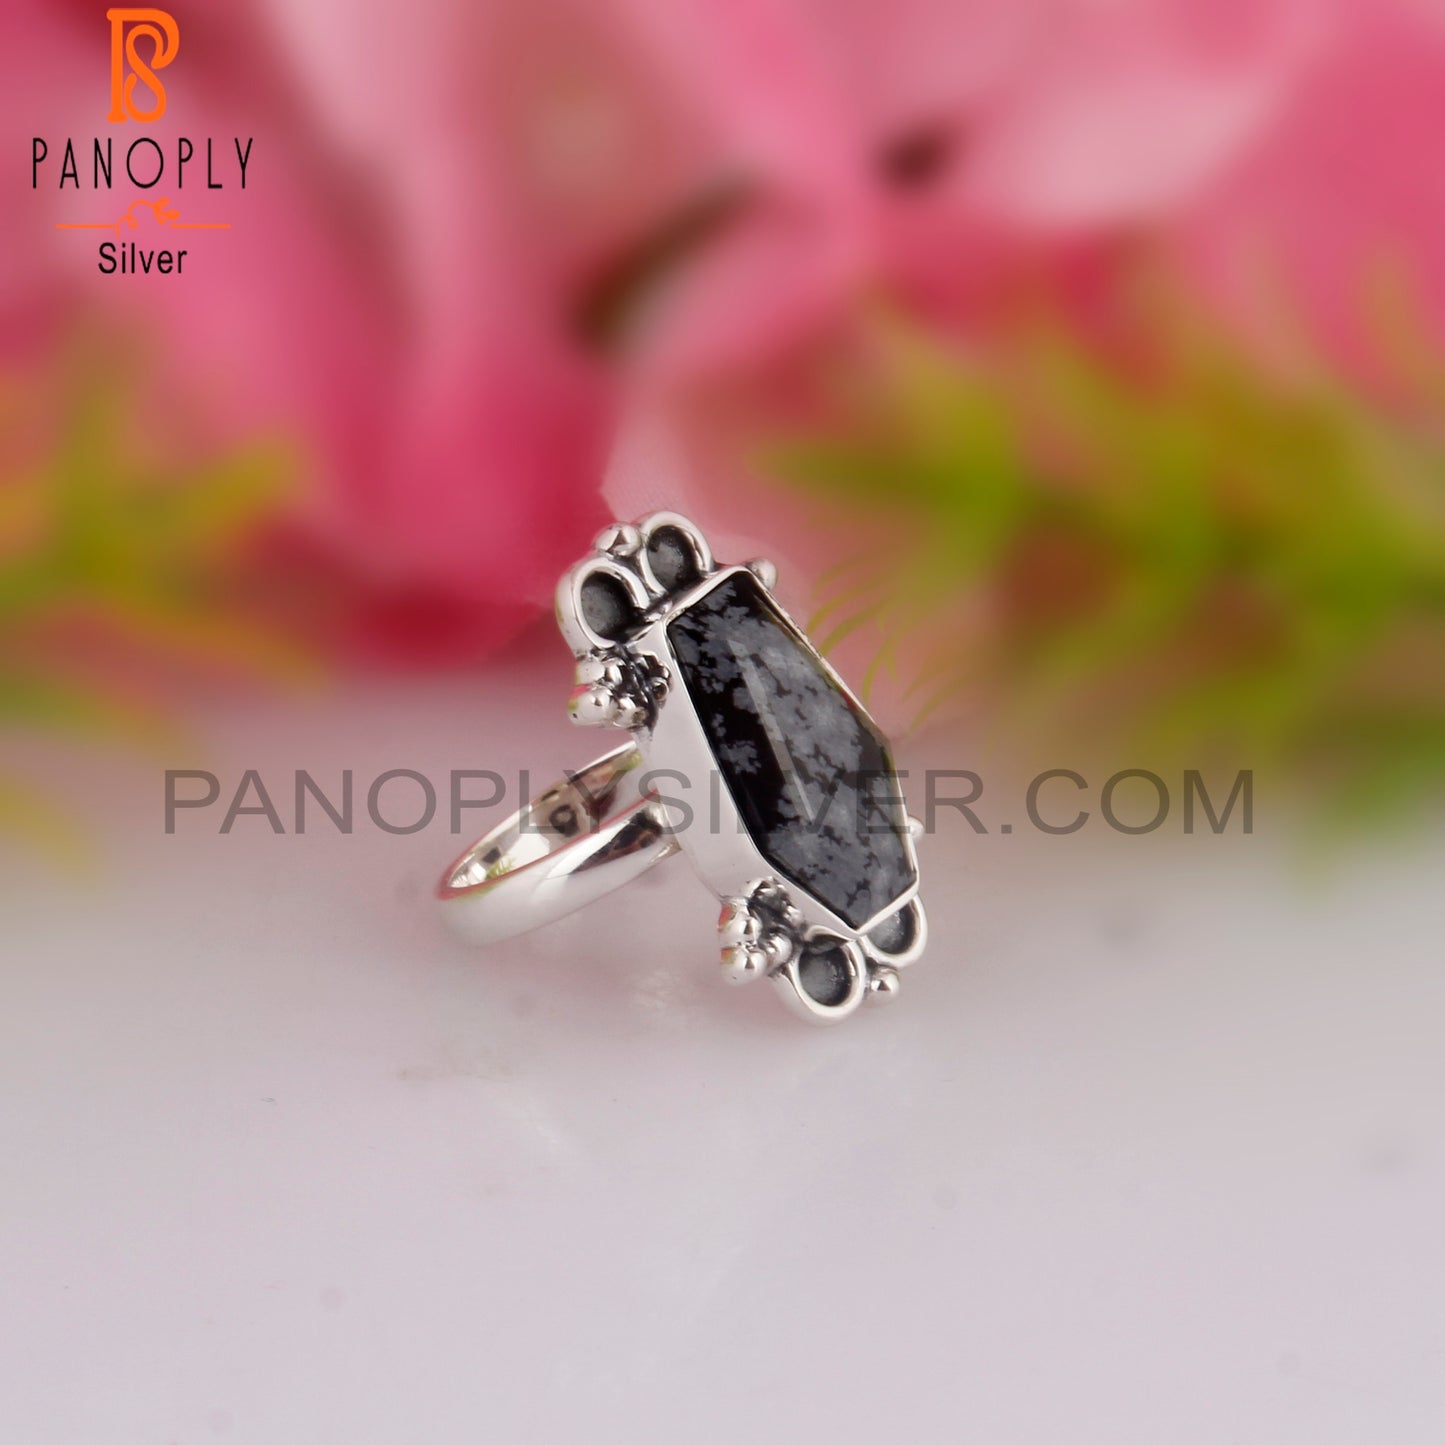 Snowflake Obsidian Aesthetic Coffin Shape 925 Silver Ring